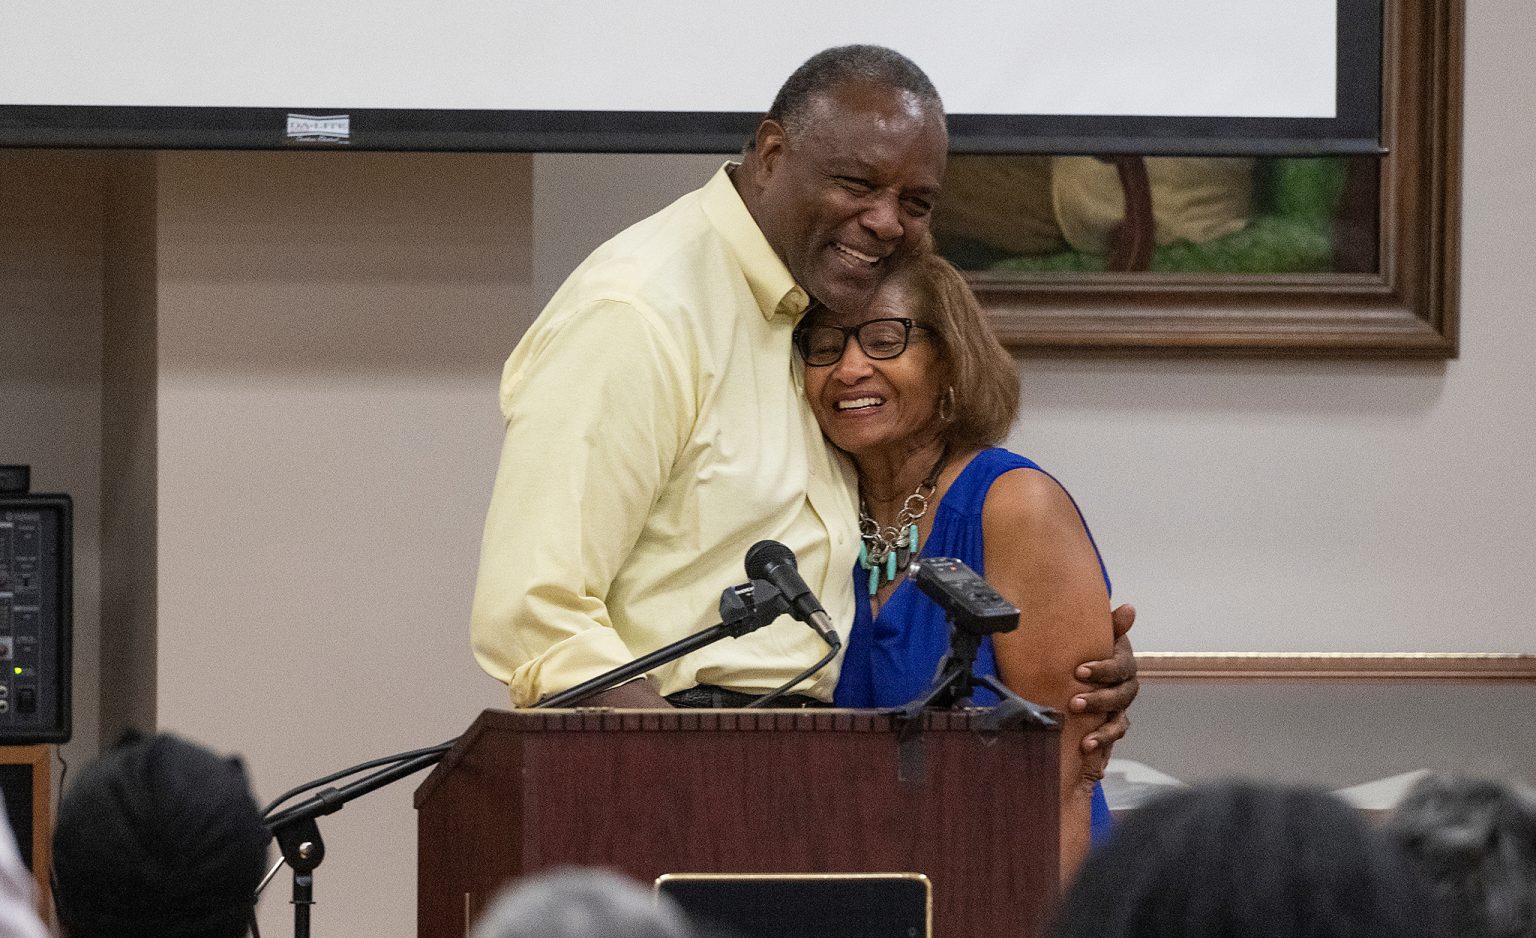 Dottie Chapman Reed (right) is greeted by former Ole Miss and NFL football player Curtis Weathers in September 2022 in the university’s J.D. Williams Library. Photo by Thomas Graning/Ole Miss Digital Imaging Services